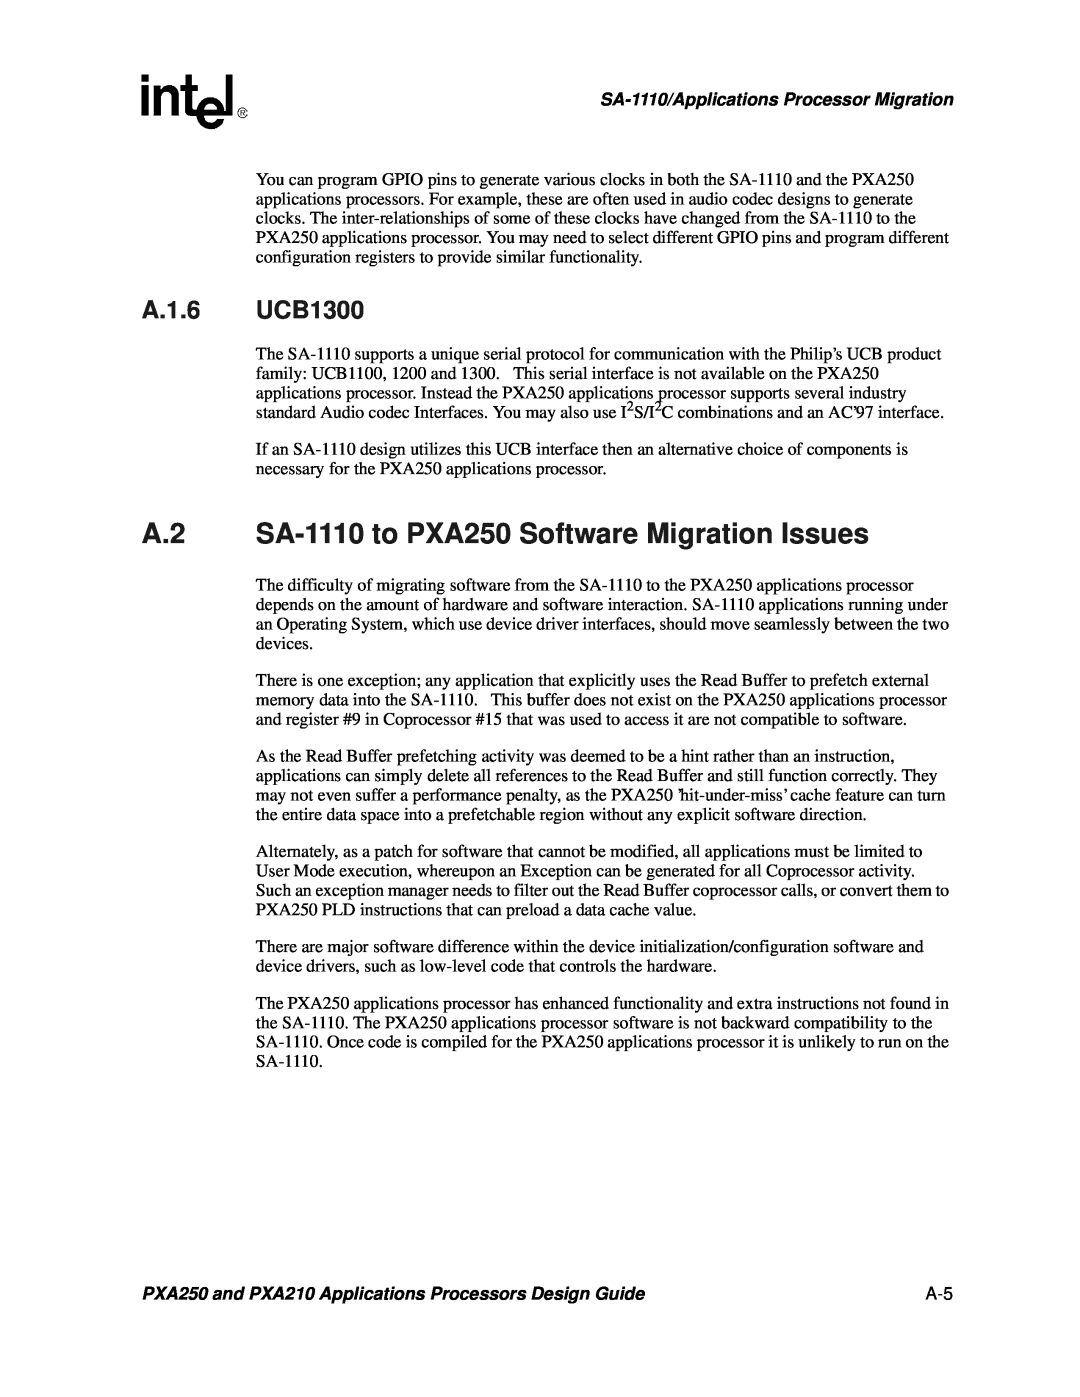 Intel PXA250 and PXA210 manual A.2 SA-1110 to PXA250 Software Migration Issues, A.1.6 UCB1300 